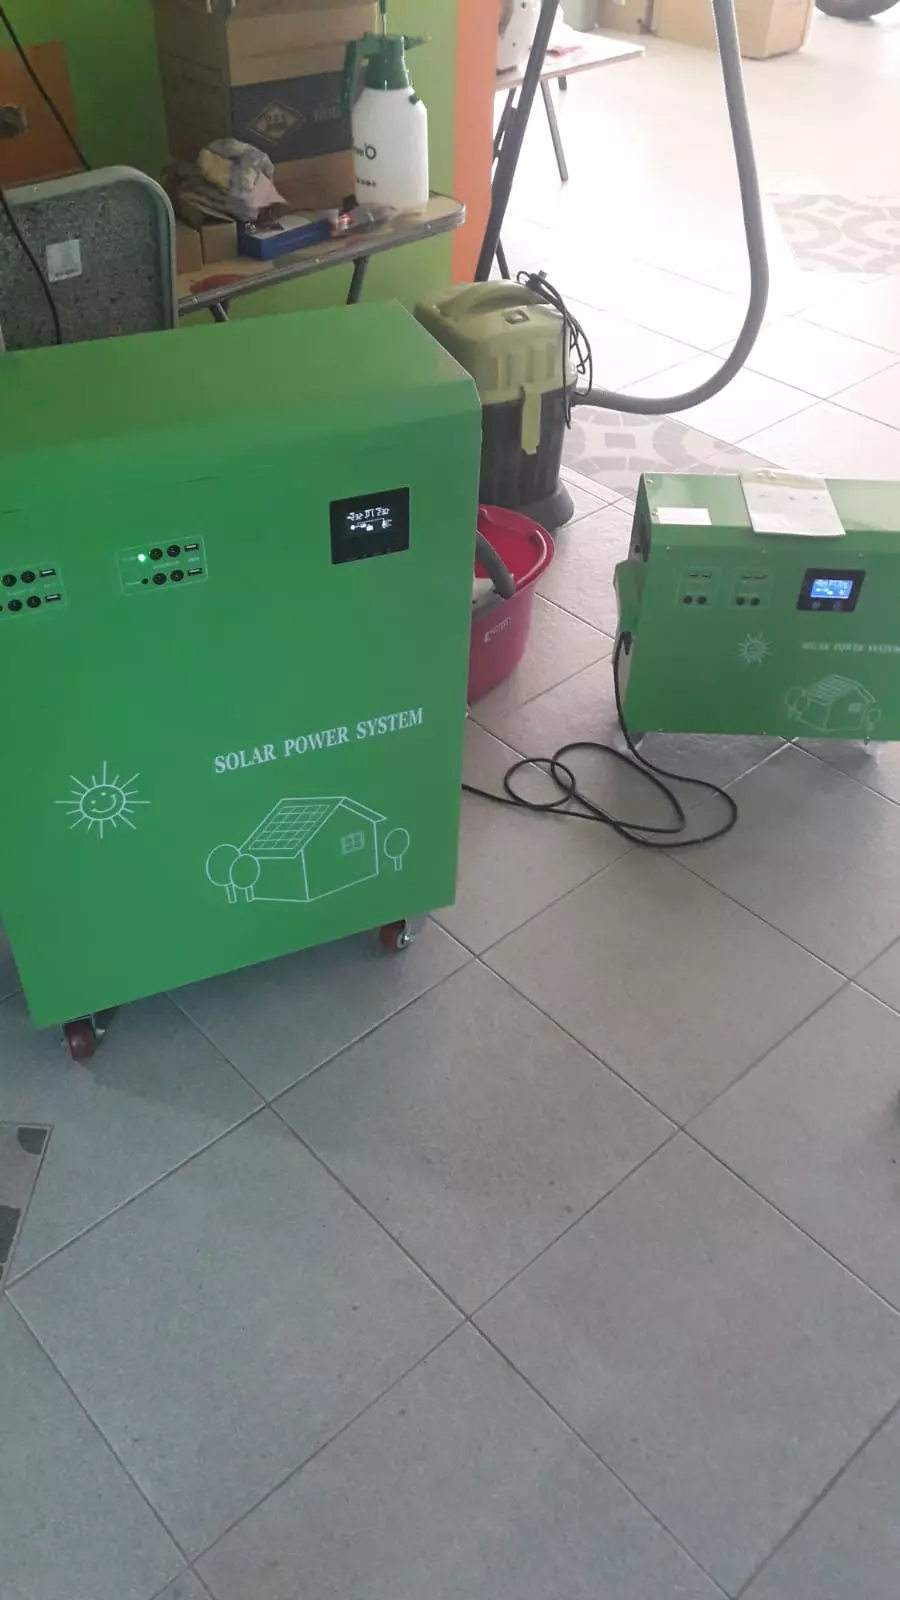 Pictures of 2 sets of portable power stations purchased by Mr. Gxx -1kw and 3kw